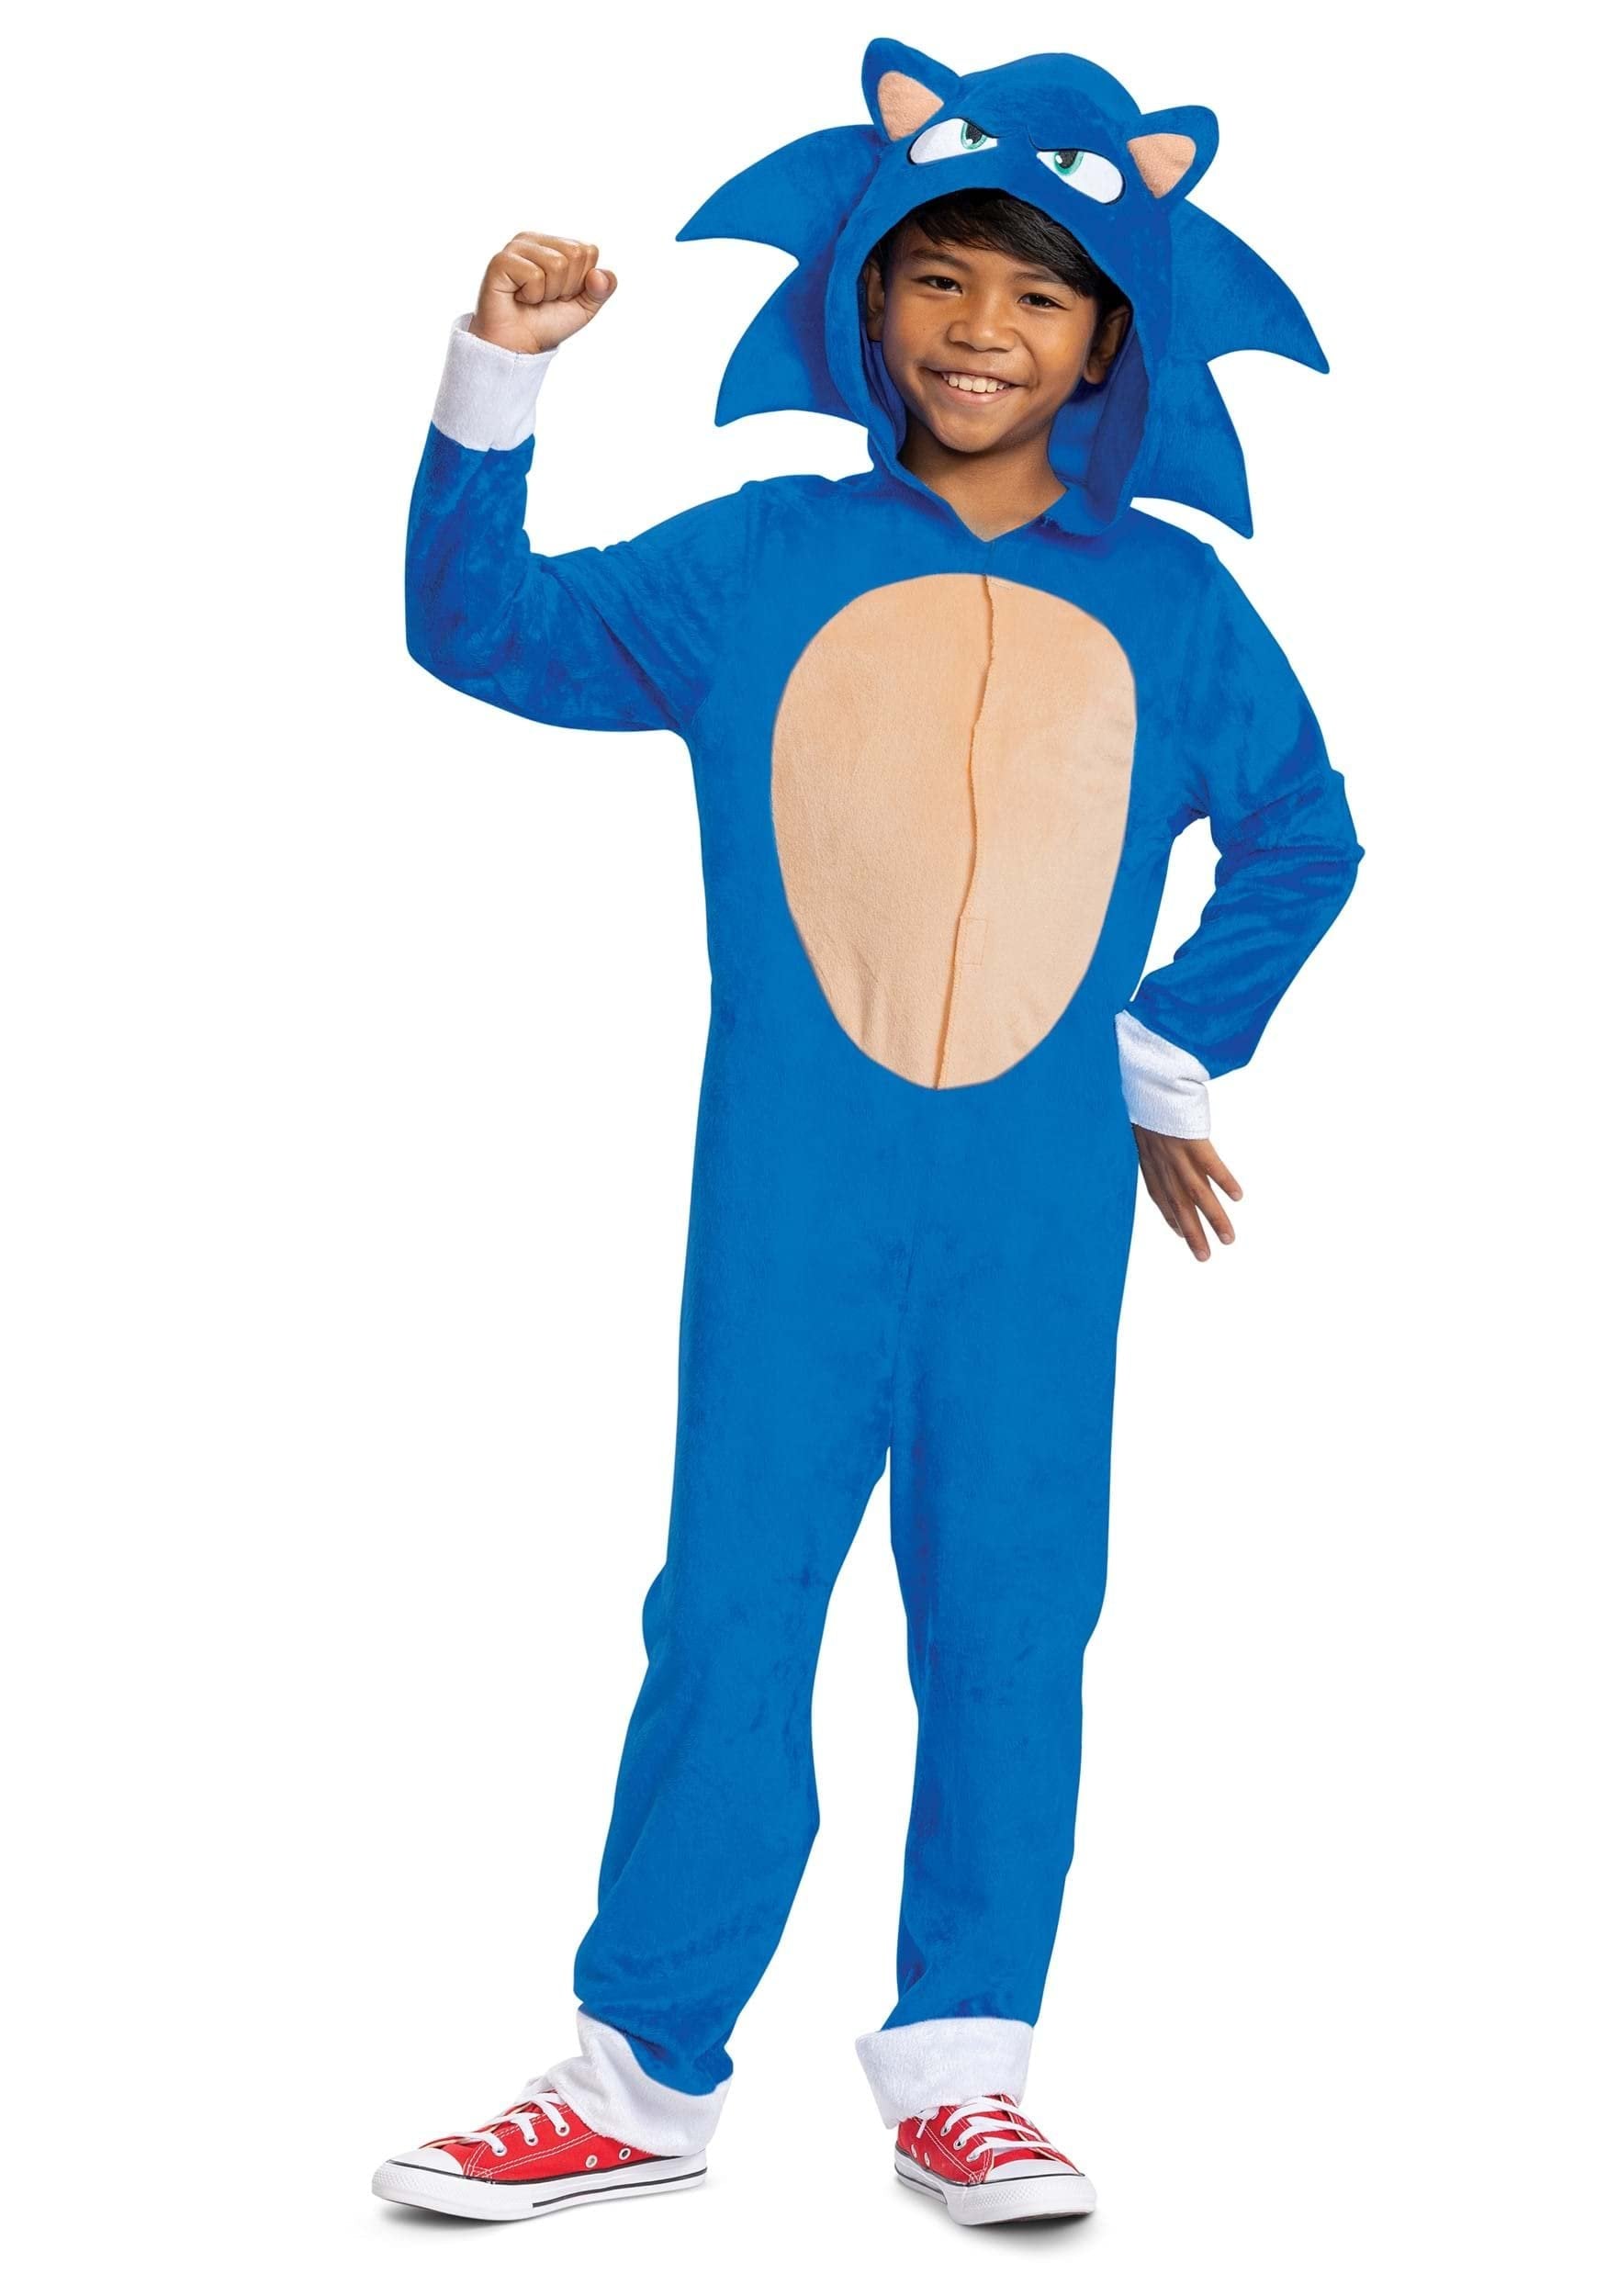 Sonic the Hedgehog Costume, Official Sonic Movie Costume and Headpiece, Kids Size Medium (7-8)